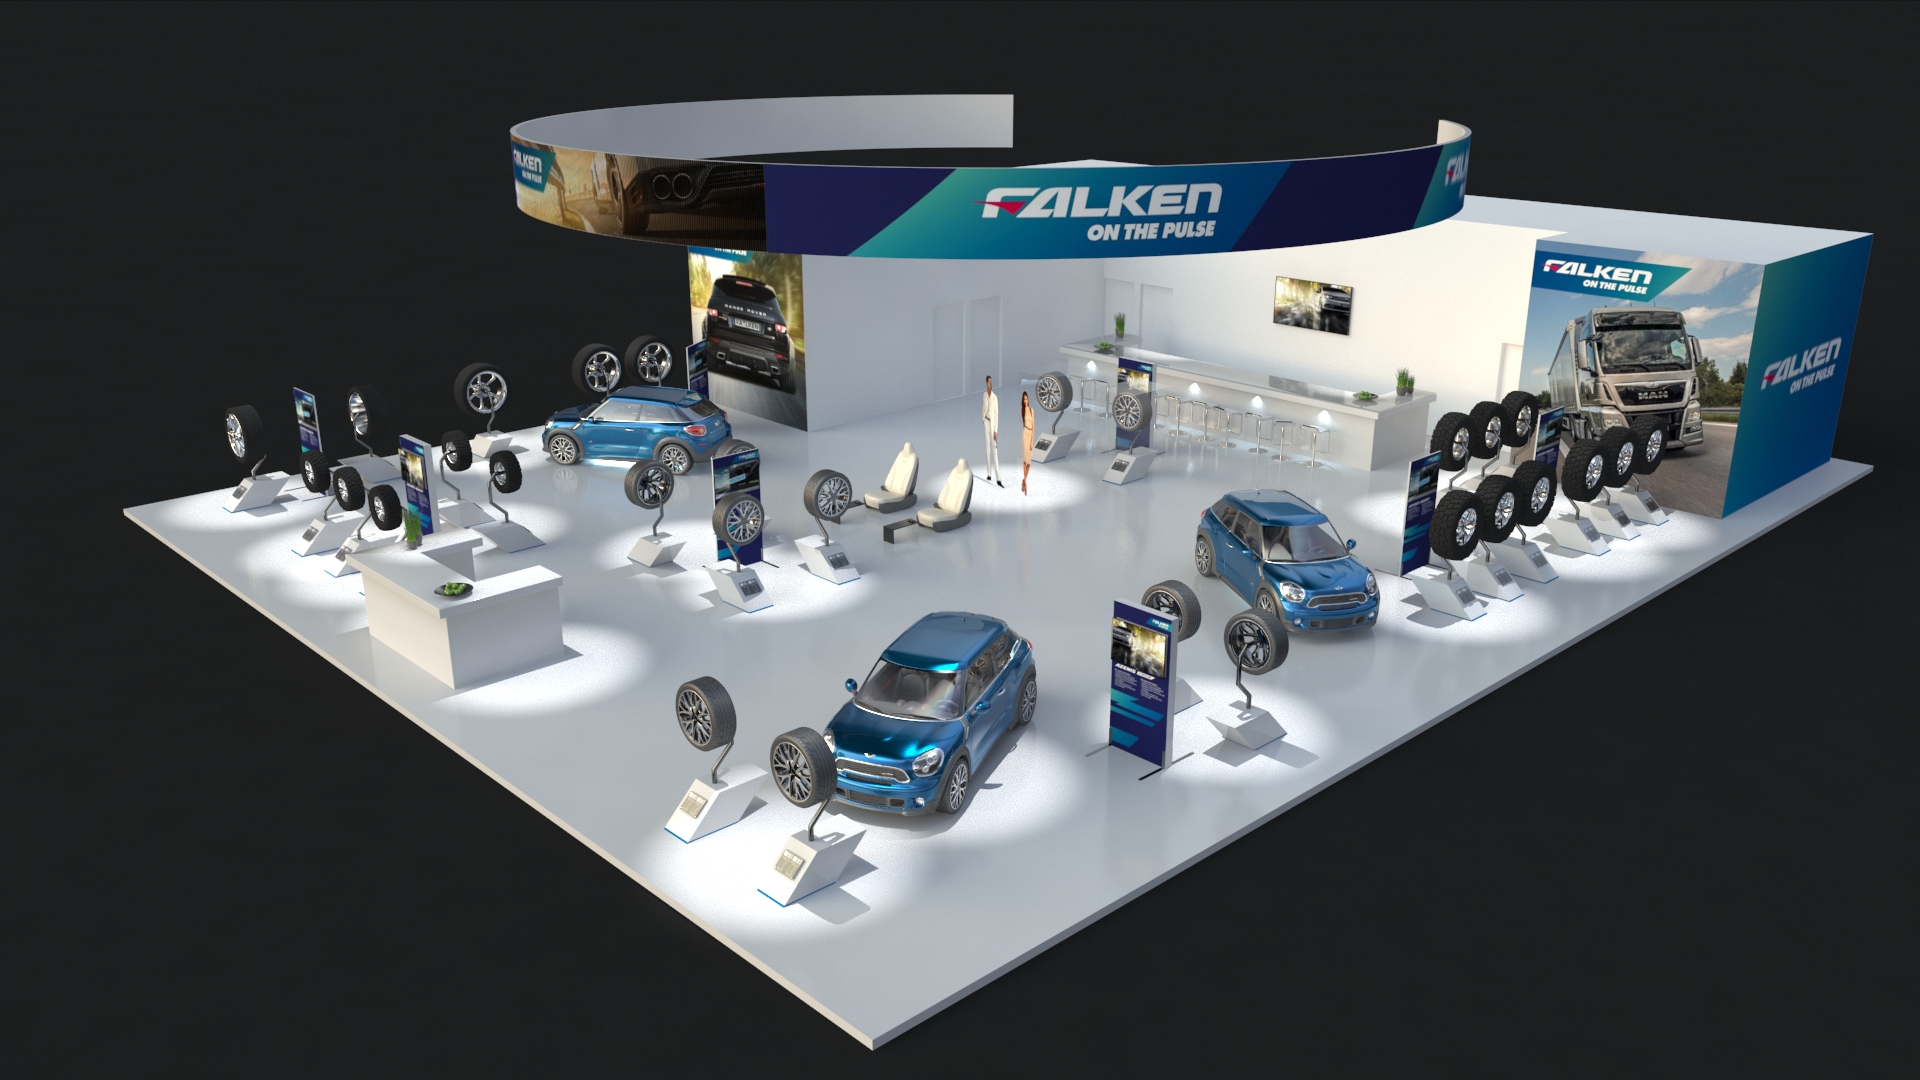 New products, new technologies for Falken at Essen show